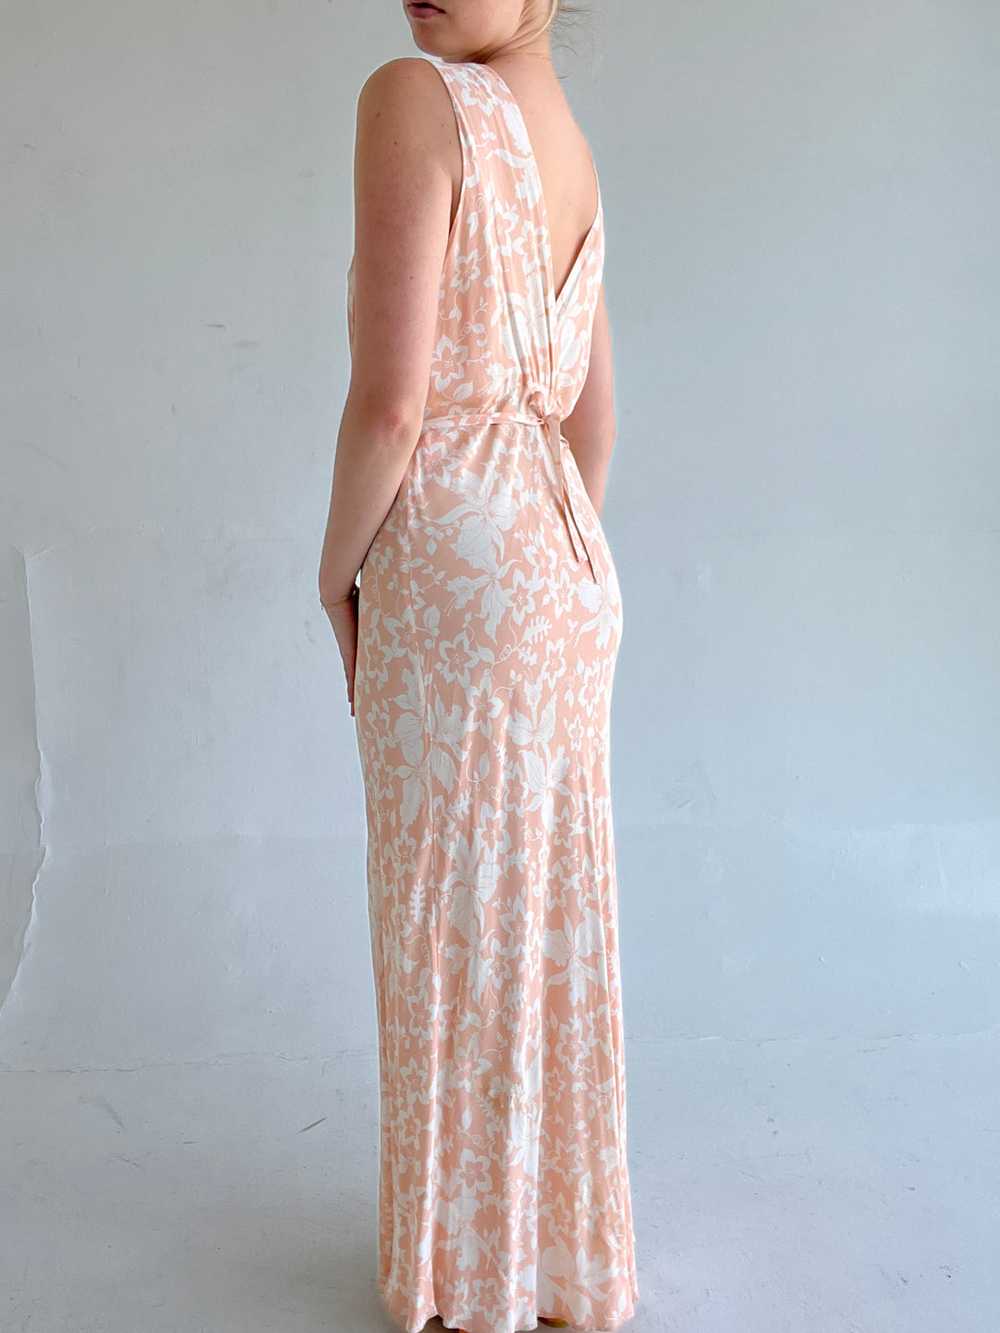 1940's Peach and White Floral Slip - image 4